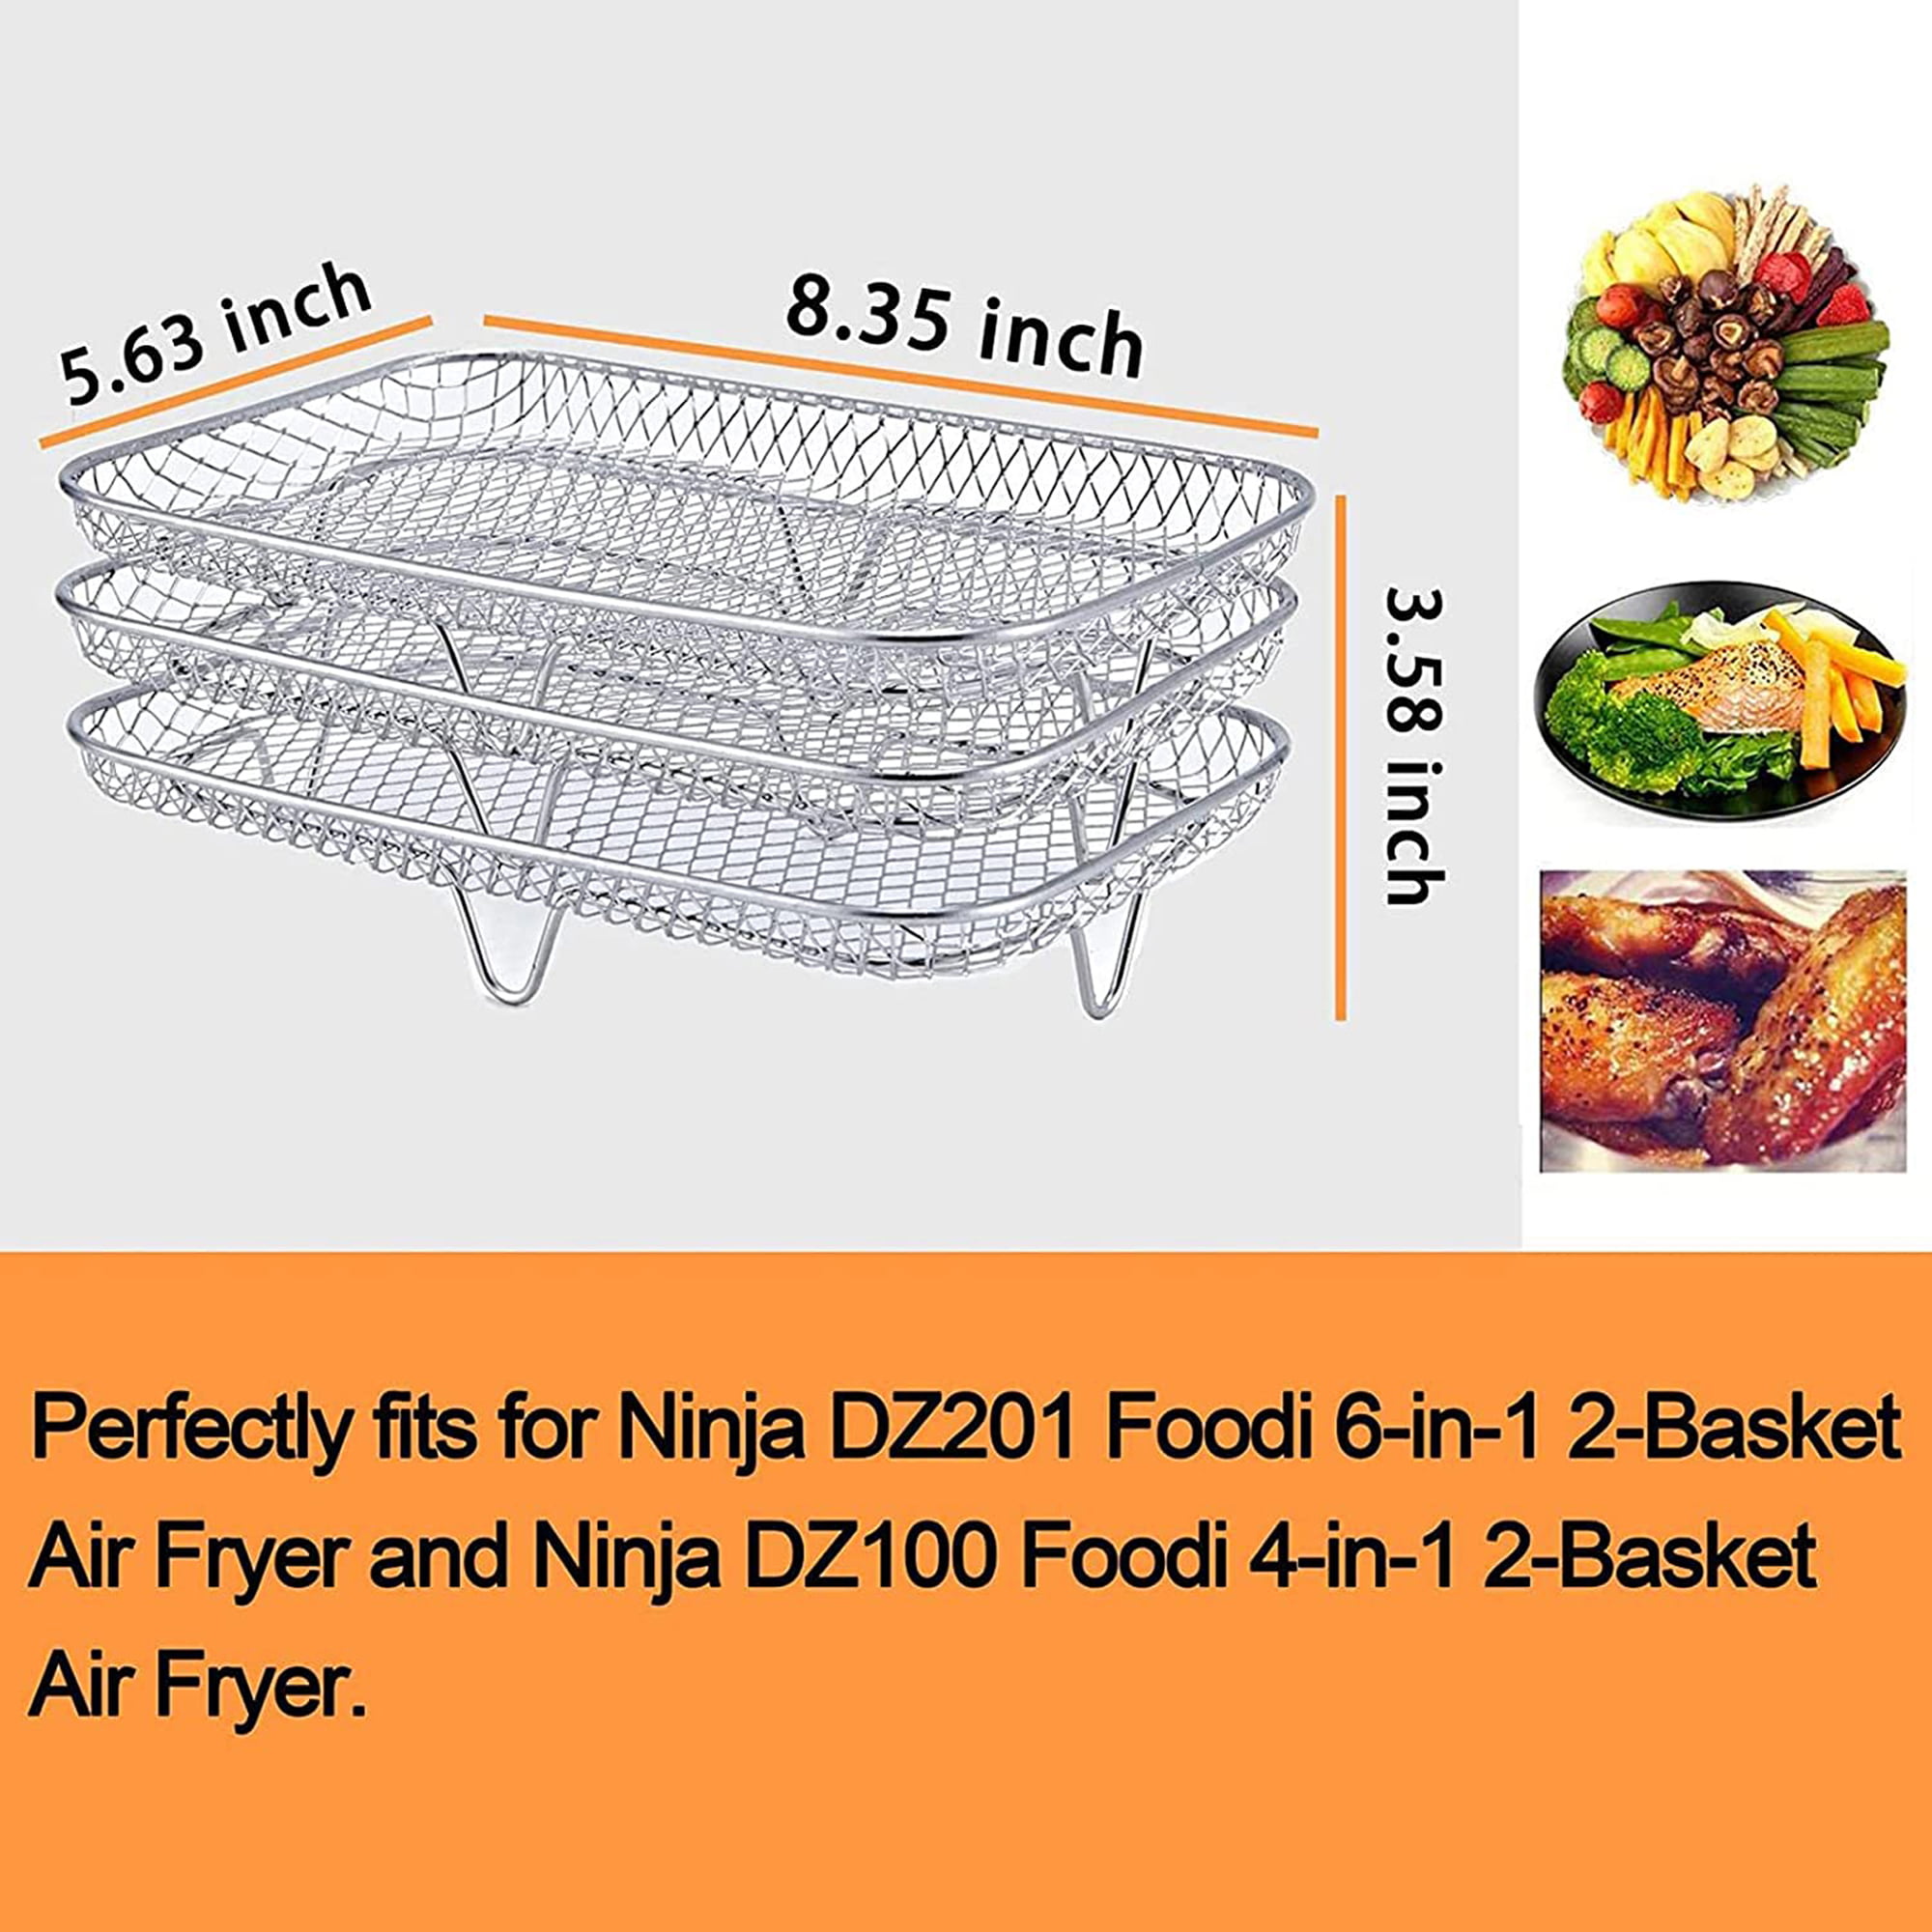 Ausyst Kitchen Gadgets Air Fryer Rack for Air Fryers Stainless Steel Multi-Layer Rack Air Fryer Accessories Steaming Rack Clearance, Size: 5.91*5.91*